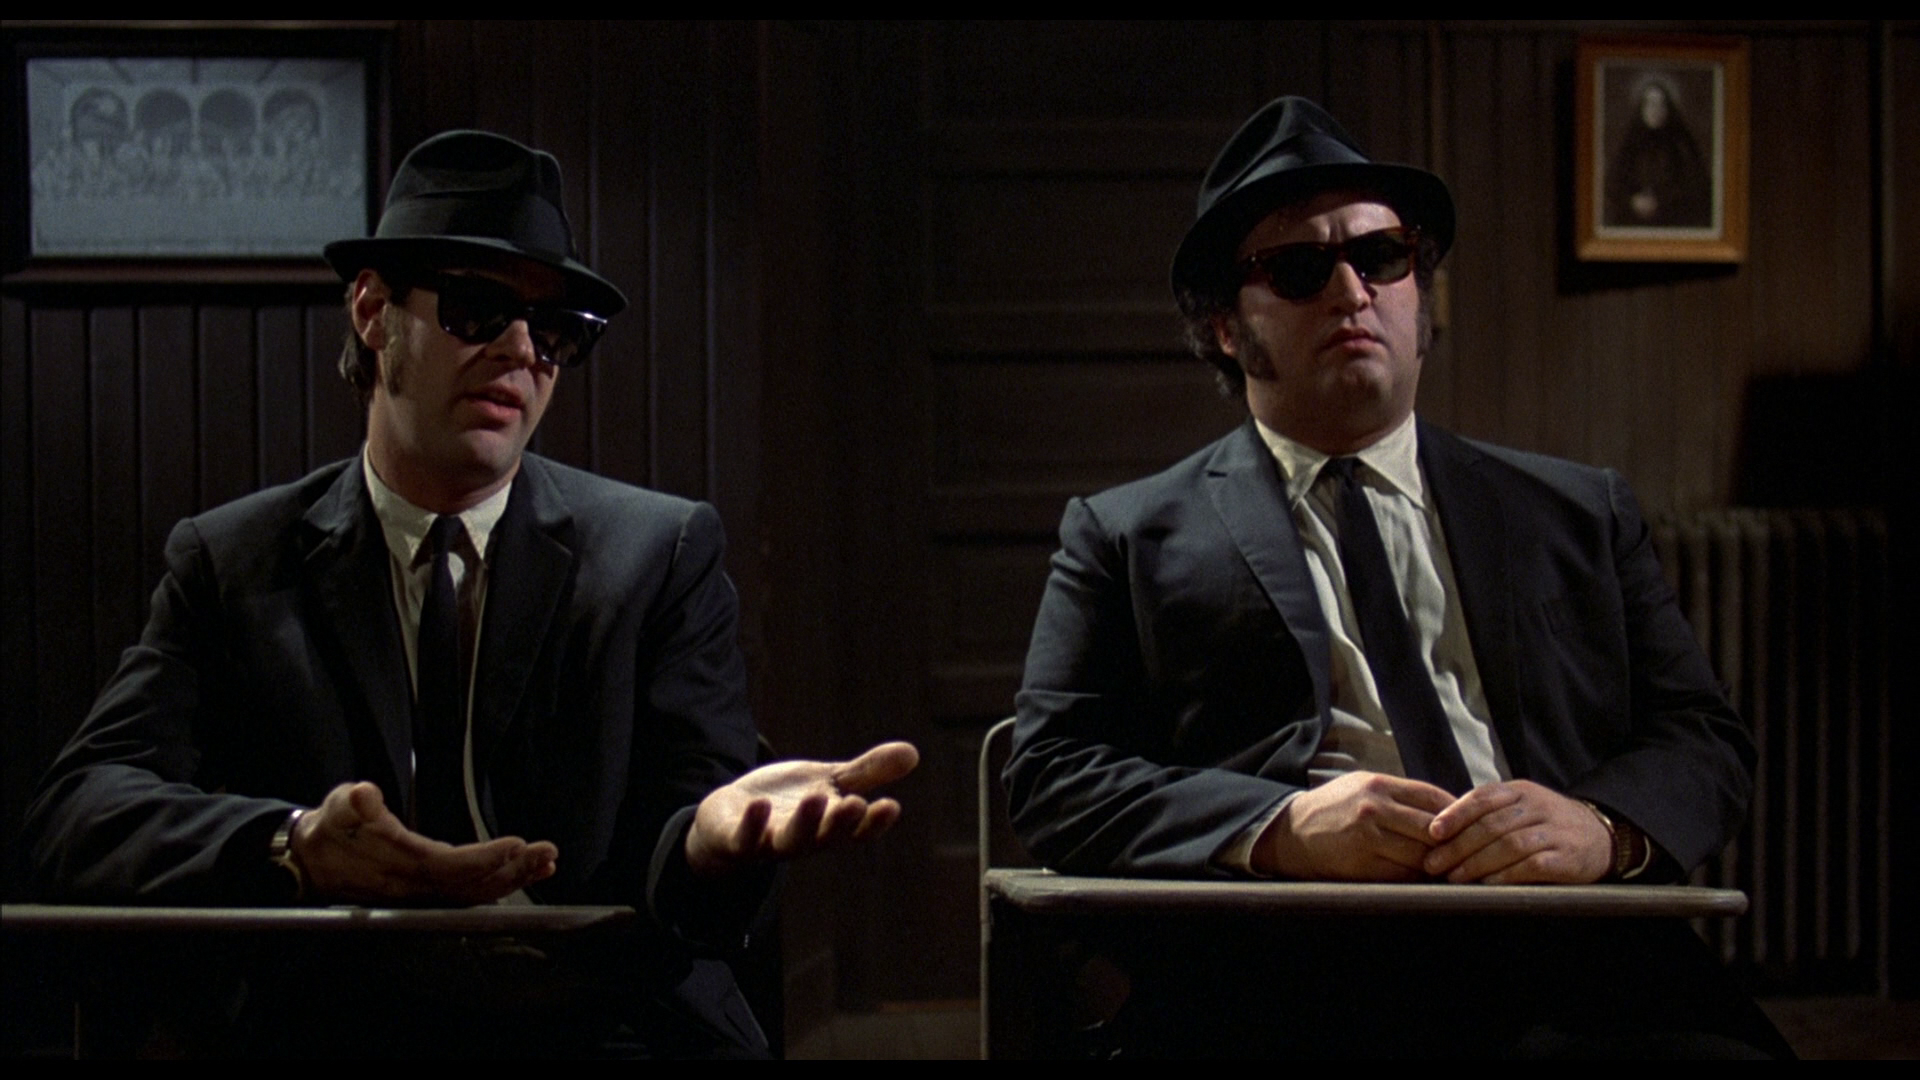 The Blues Brothers - Peter Gunn Theme (by James Newton Howard)